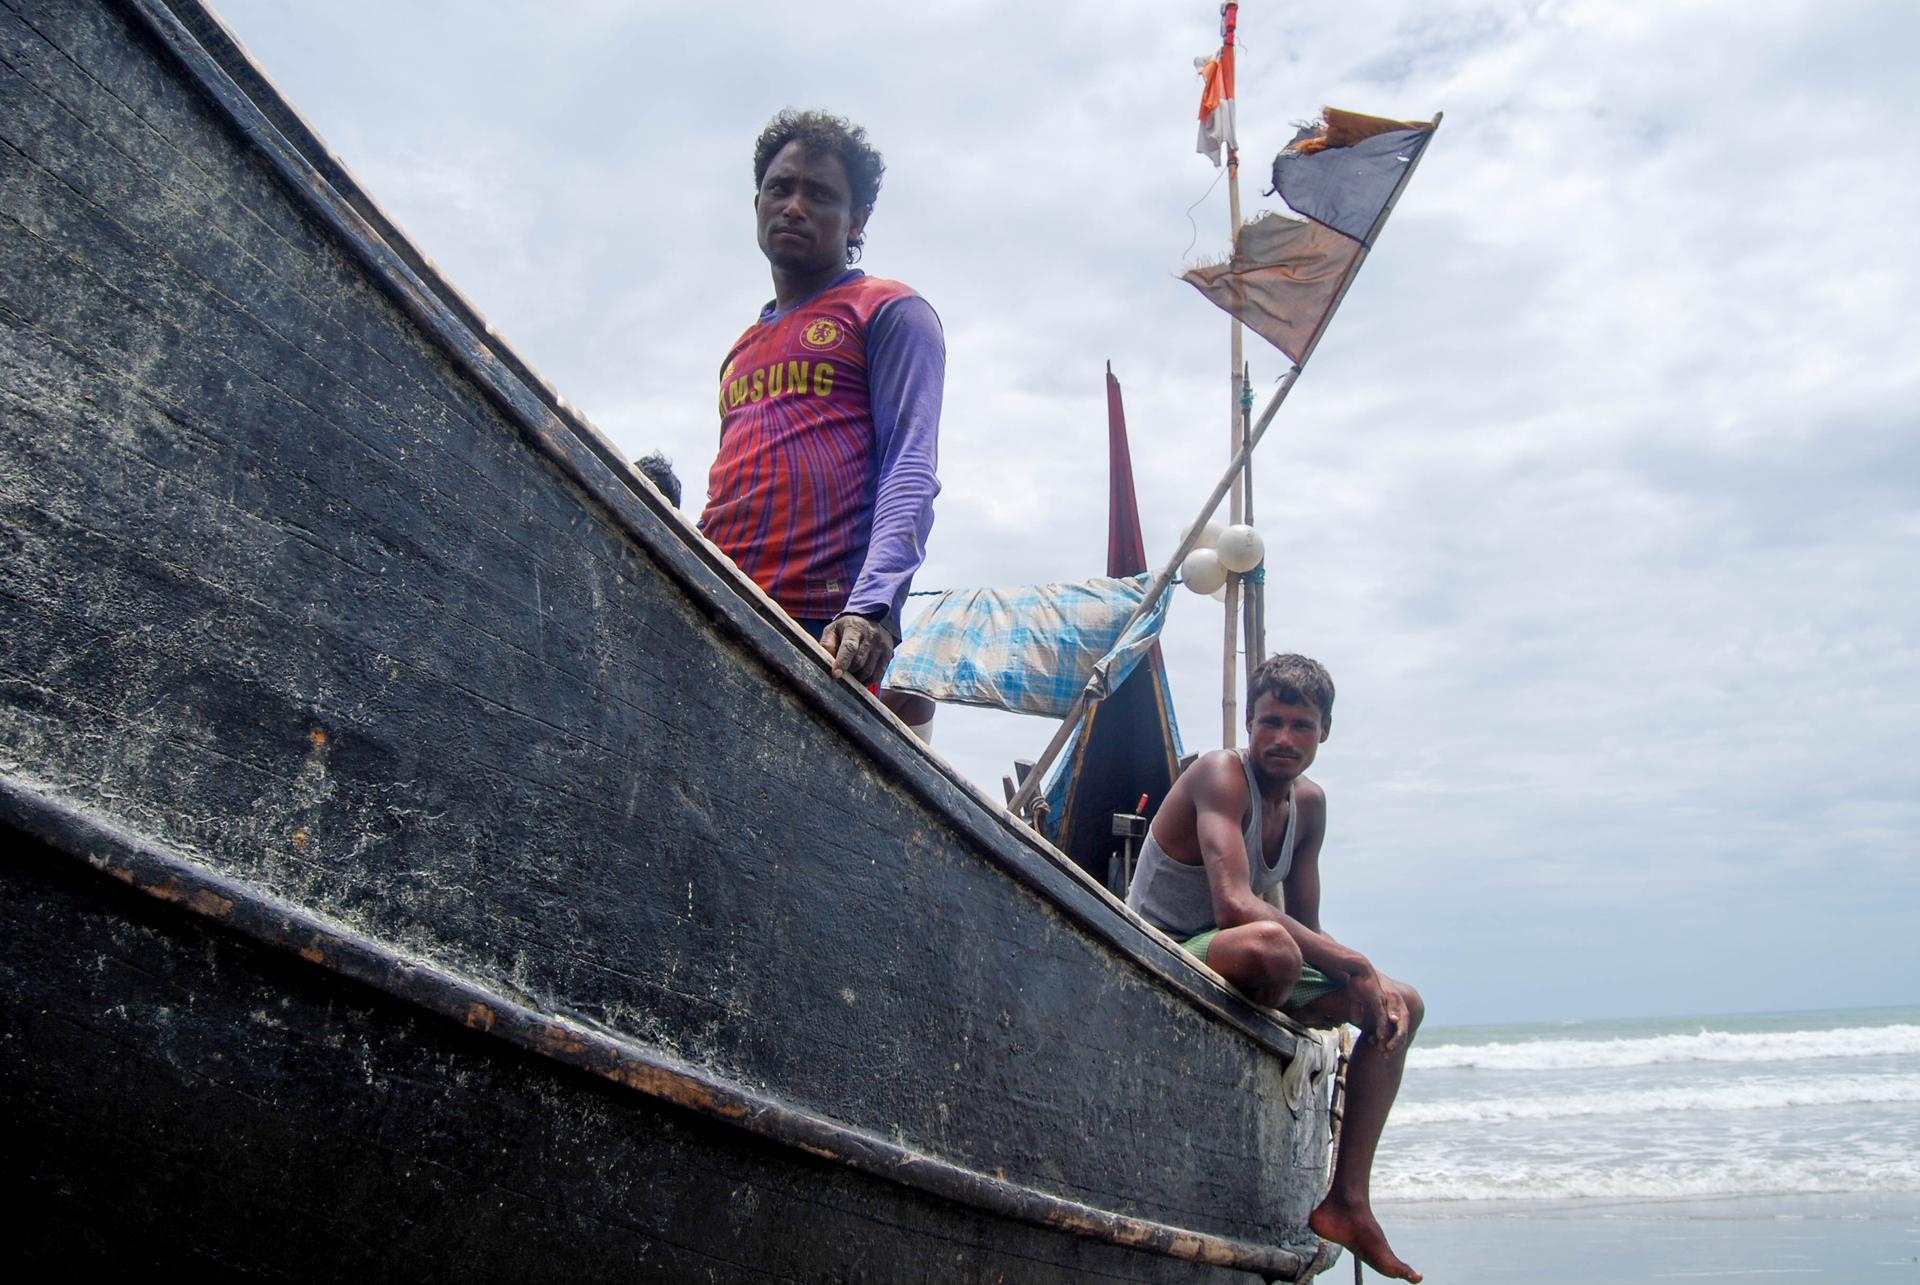 Aman Ullah, left, a Rohingya refugee in Cox's Bazar, takes home one-tenth of the profits that his fishing boat makes every day. The rest goes to the boat's owner and his four other crewmates.